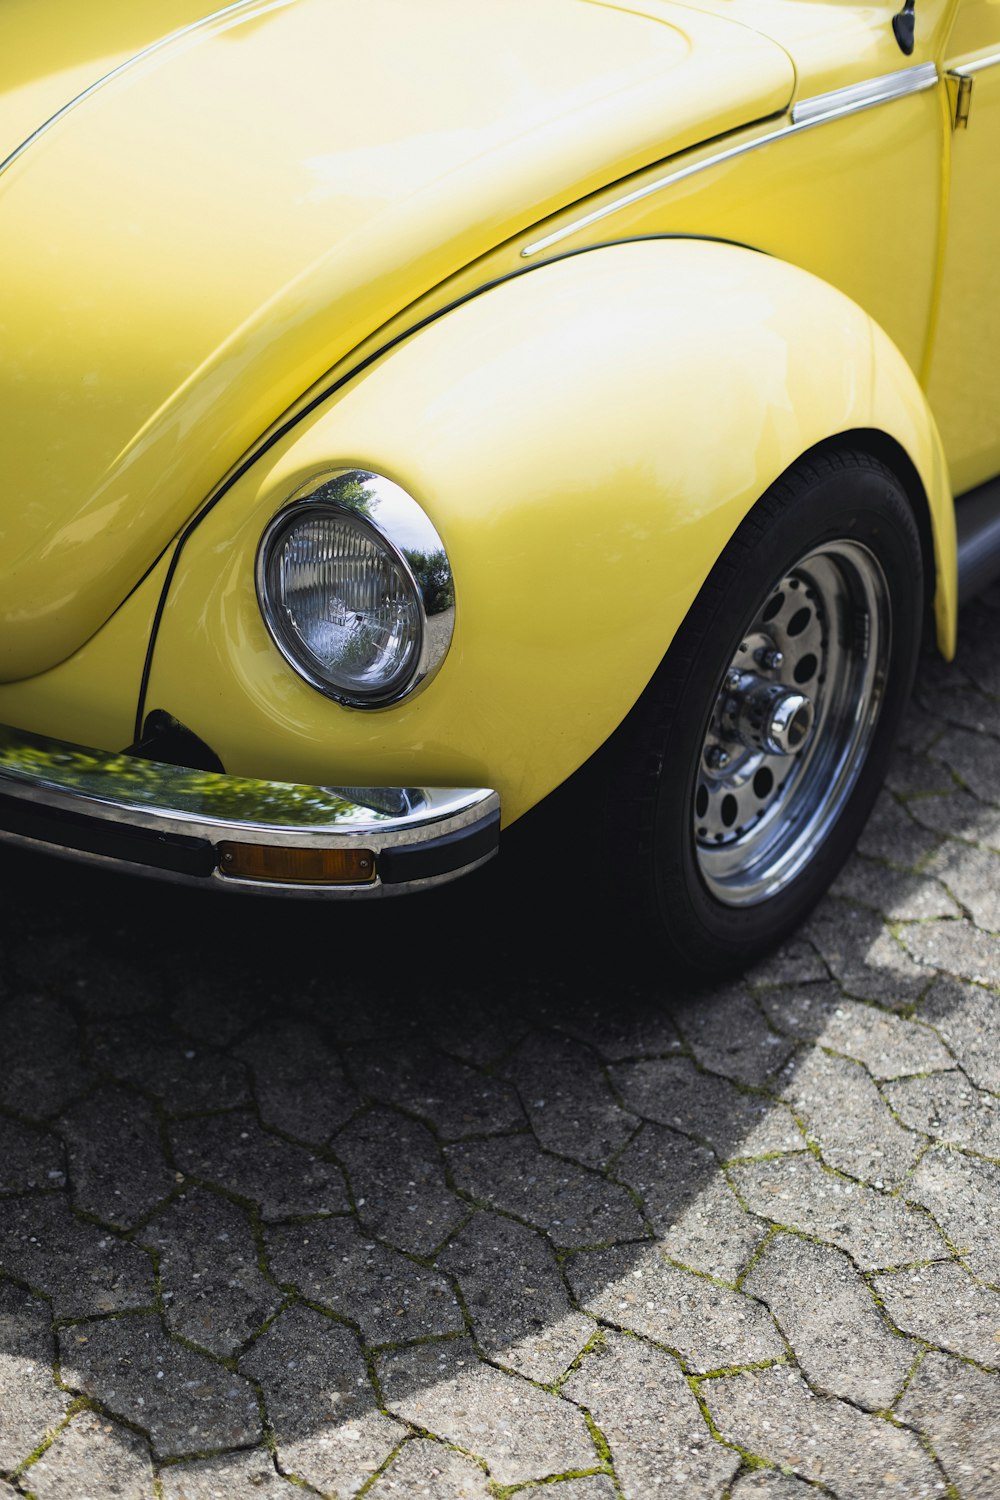 a close up of the front of a yellow vw bug